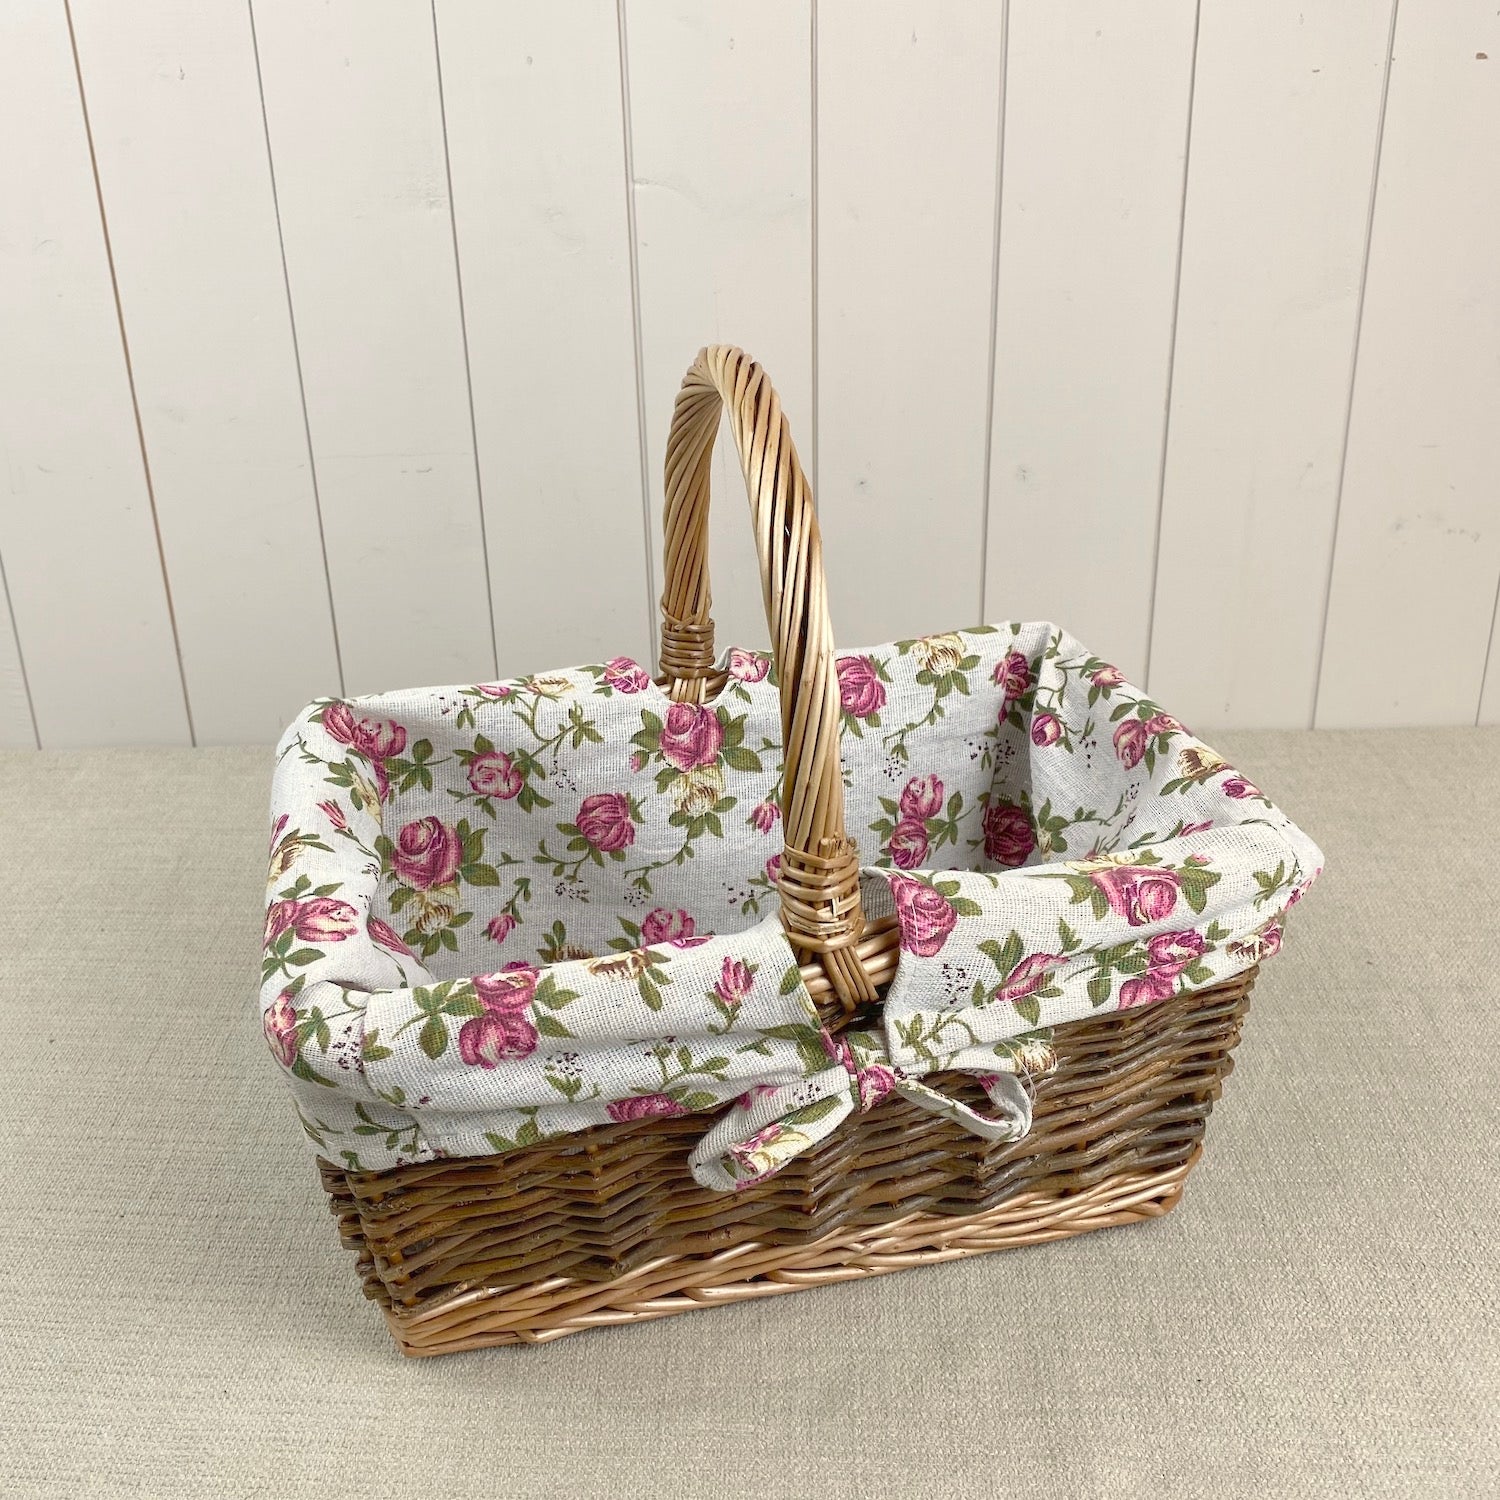 Vintage Rose Willow Project Basket - Small Rectangular